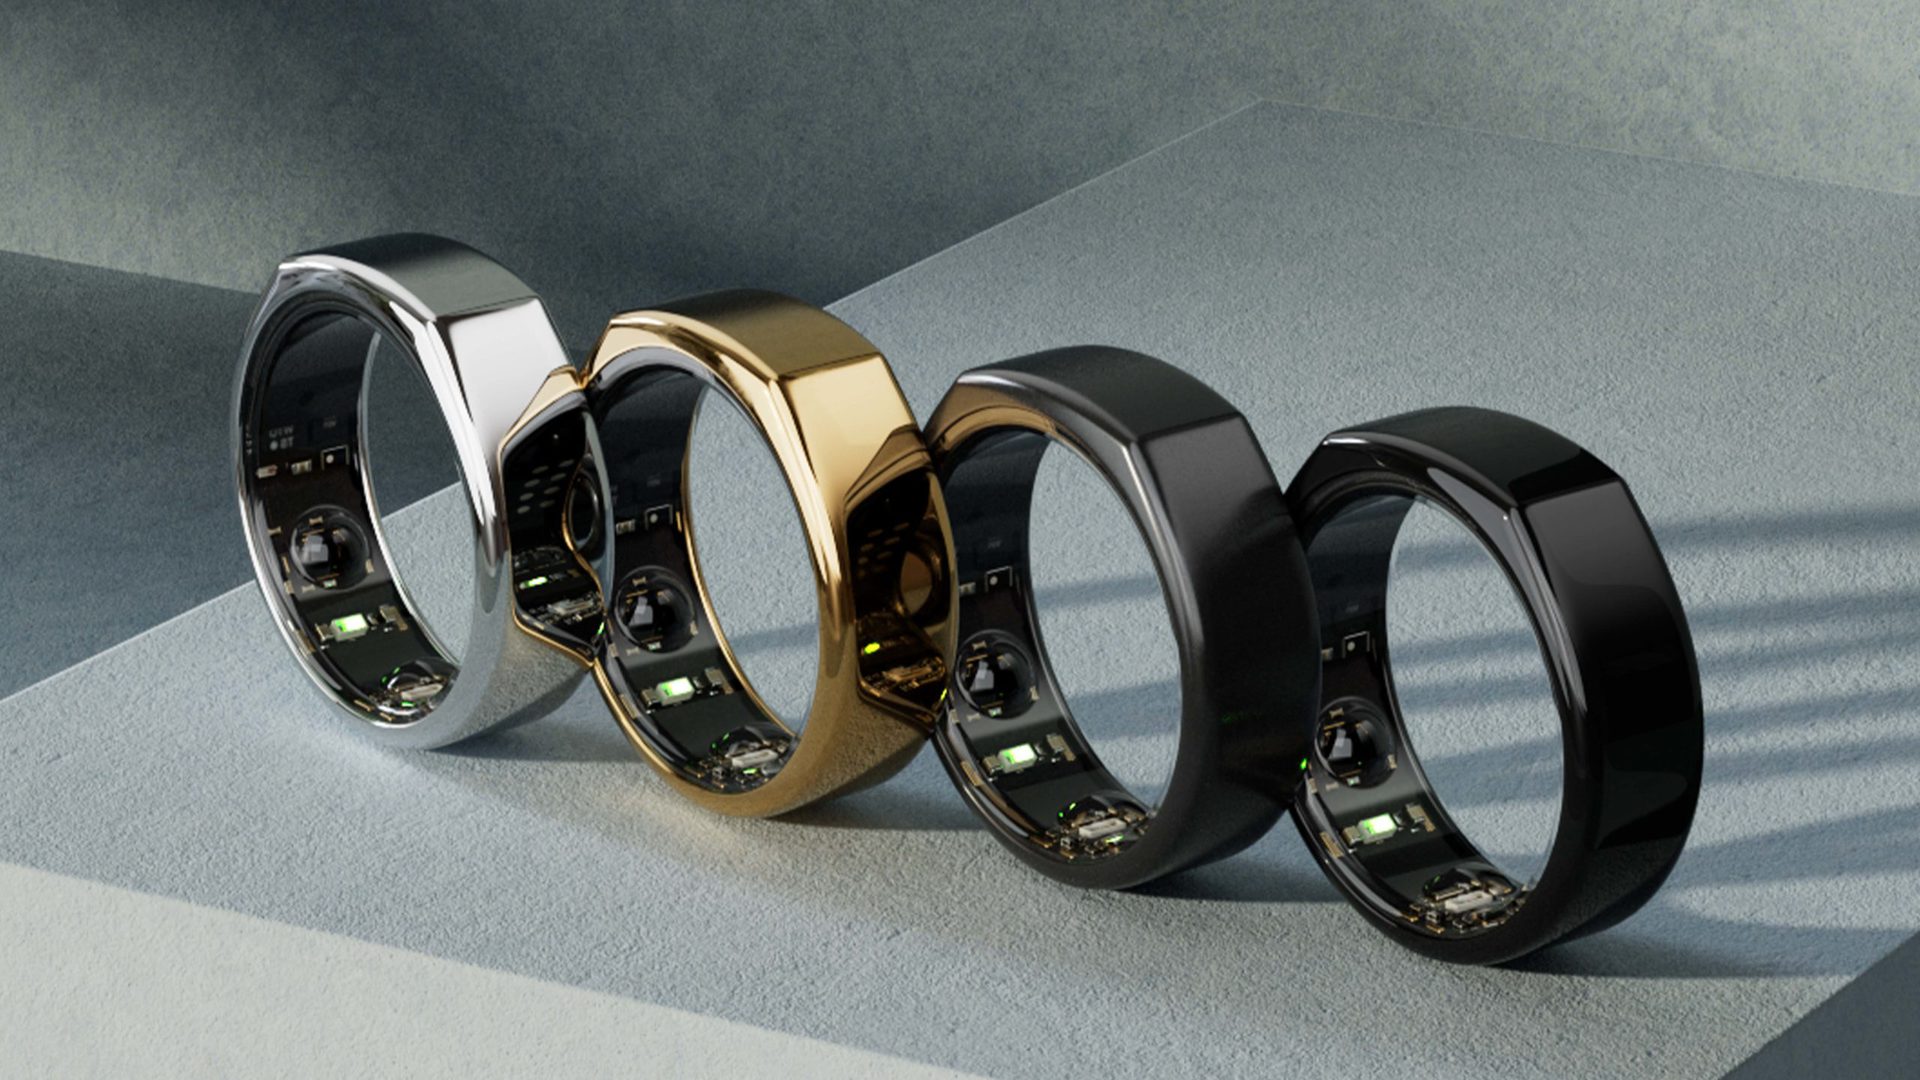 https://www.androidauthority.com/wp-content/uploads/2021/10/Oura-Ring-Generation-3-scaled.jpg